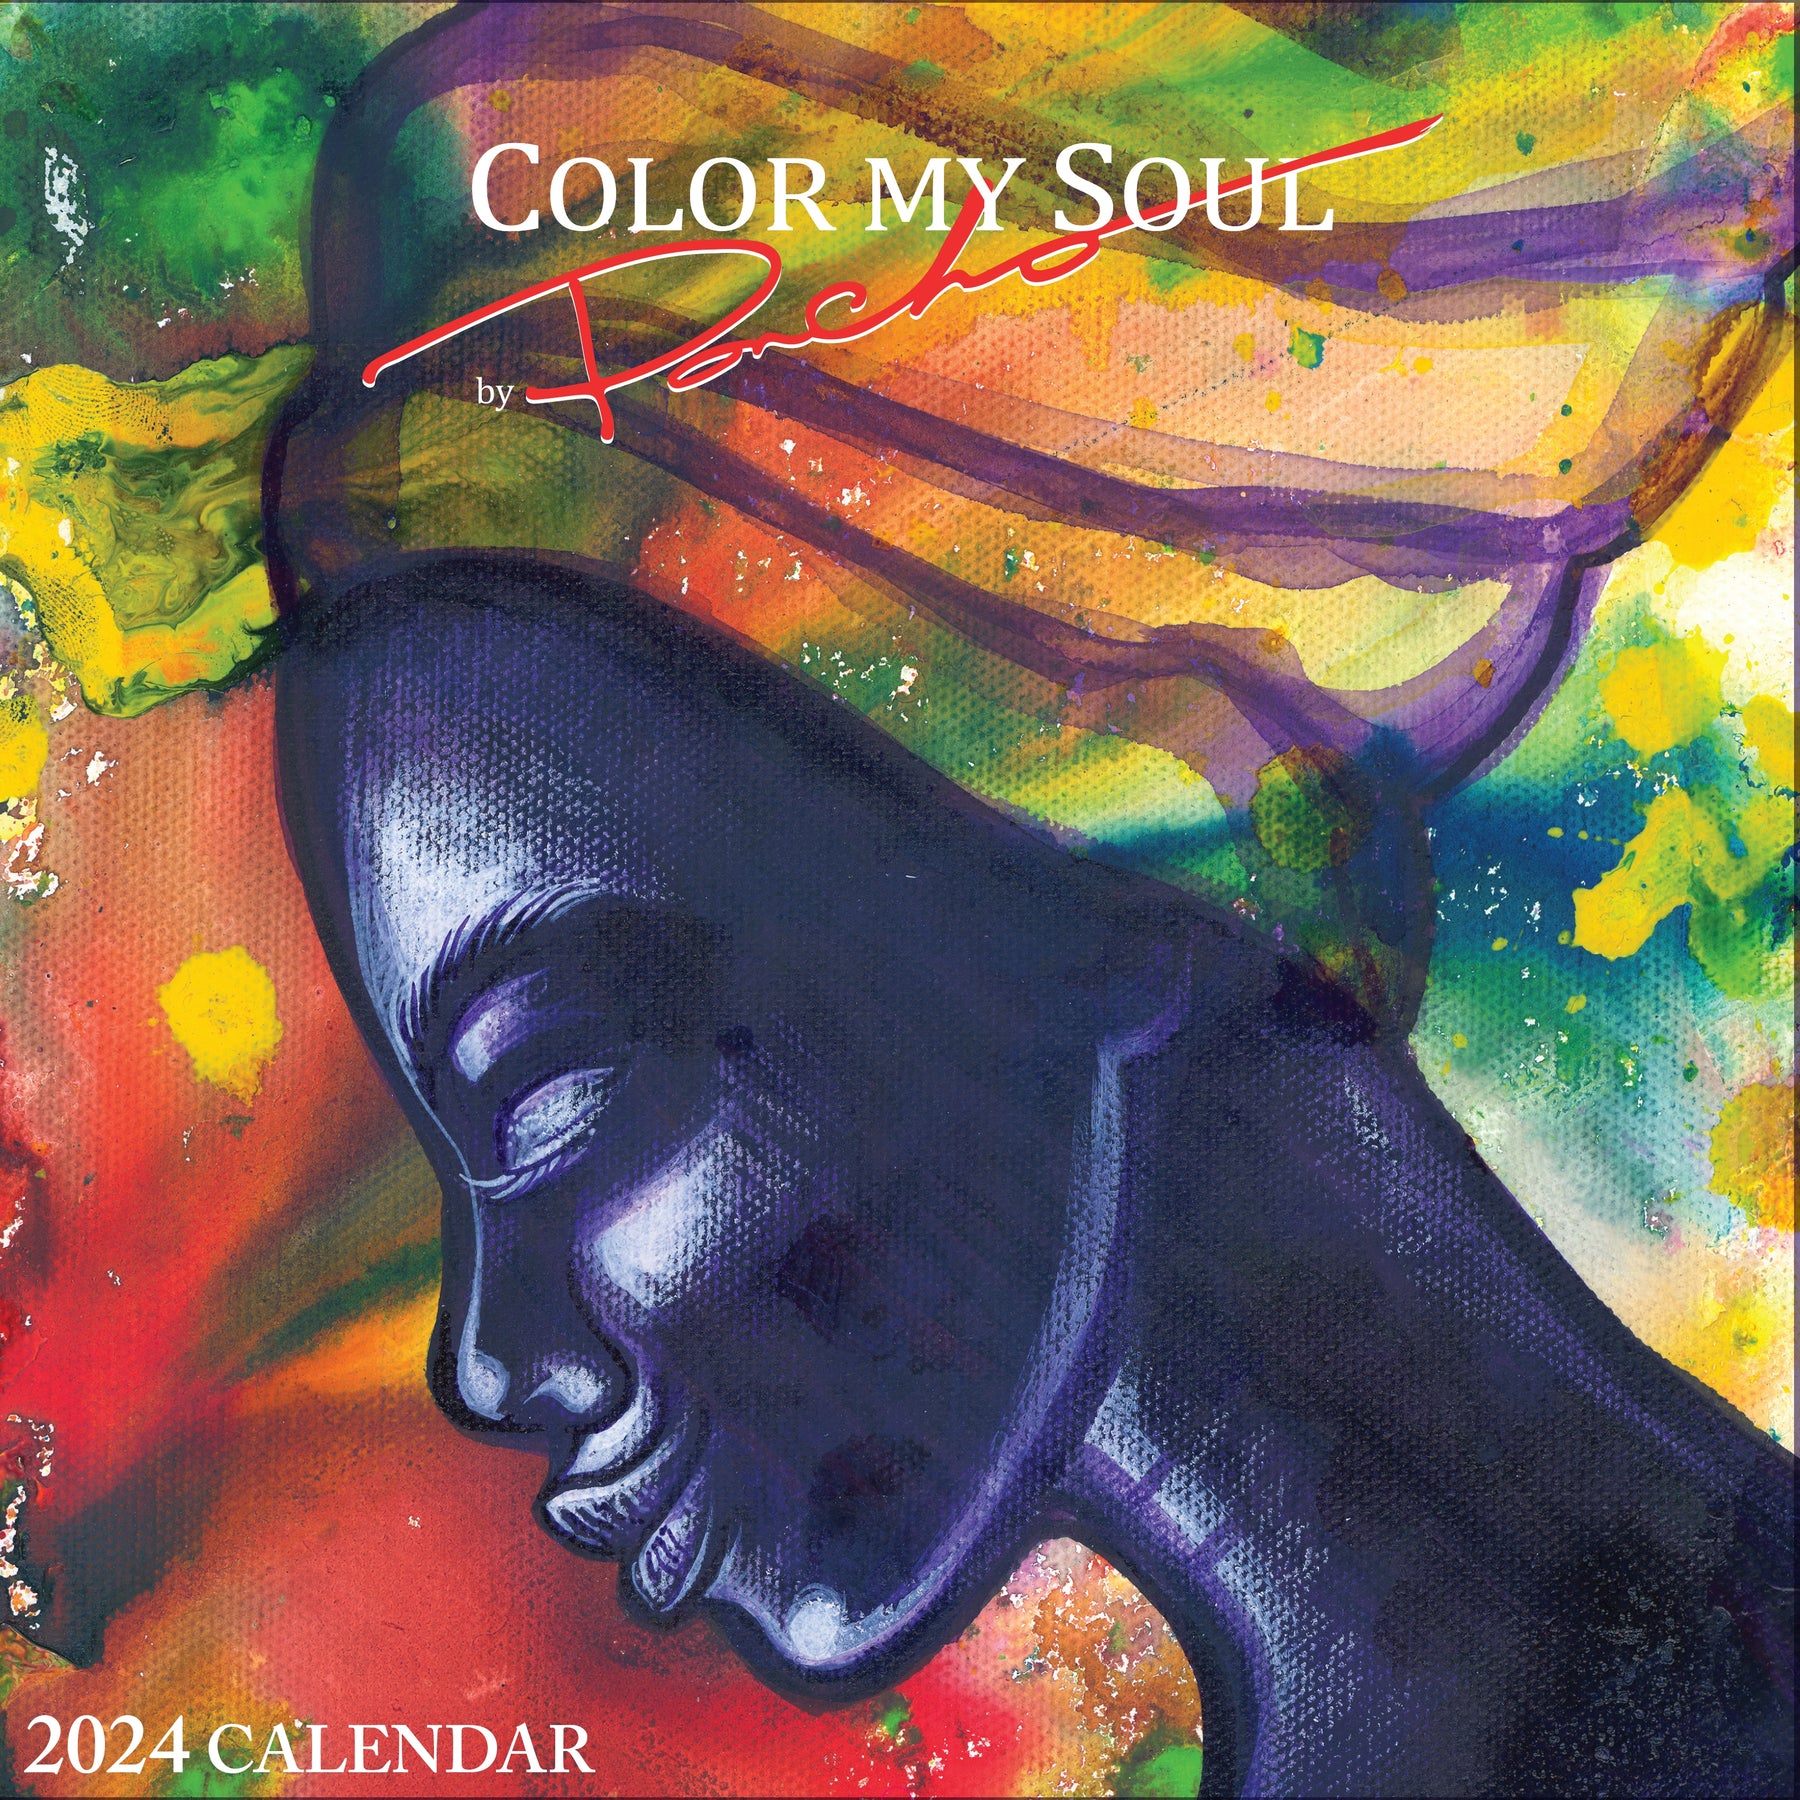 1 of 6: Color My Soul: The Art of Larry 